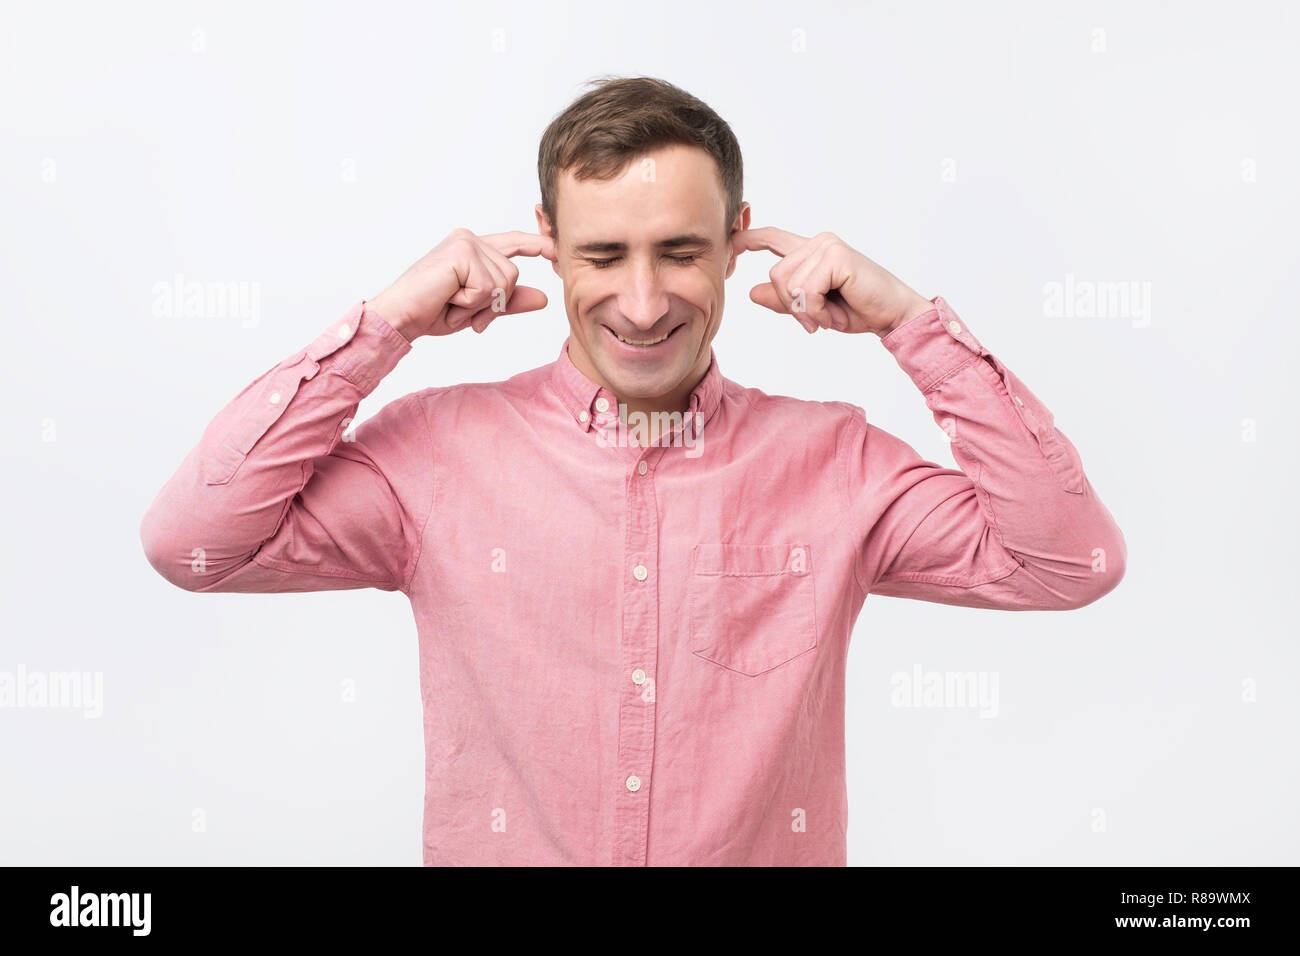 Cheerful italian man plugging ears with fingers and winking. Stock Photo